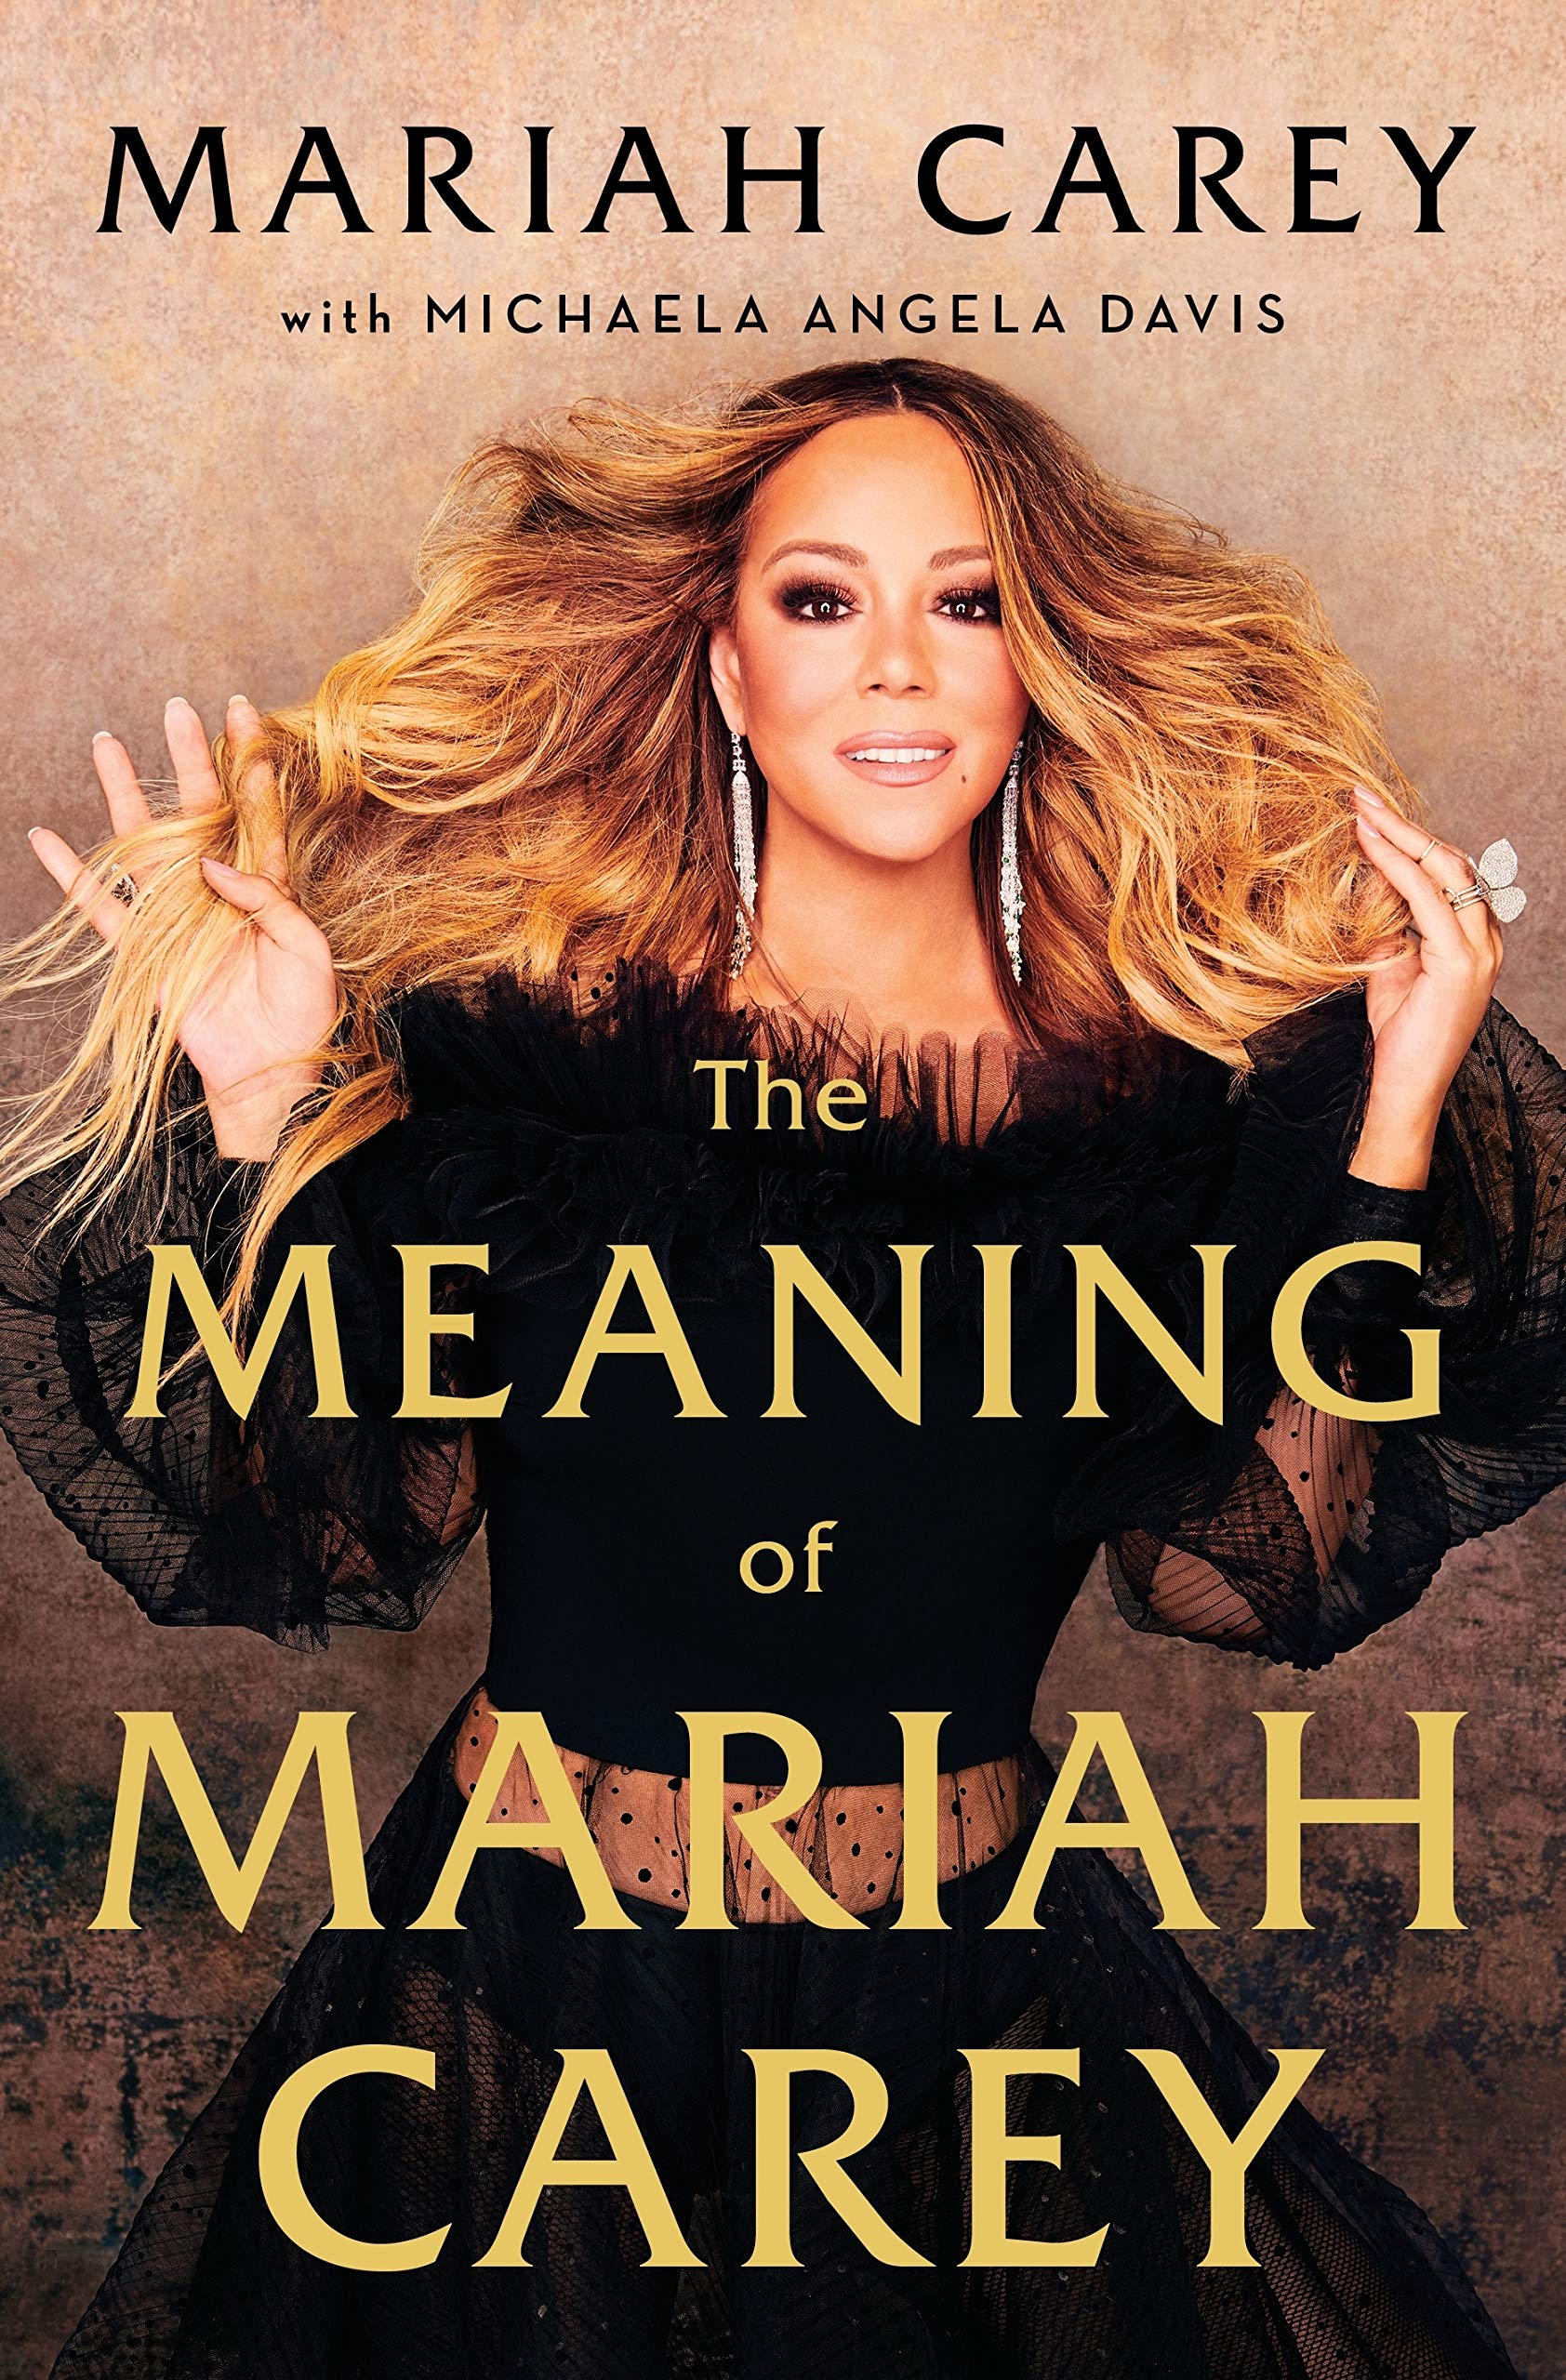 MEANING OF MARIAH CAREY, THE